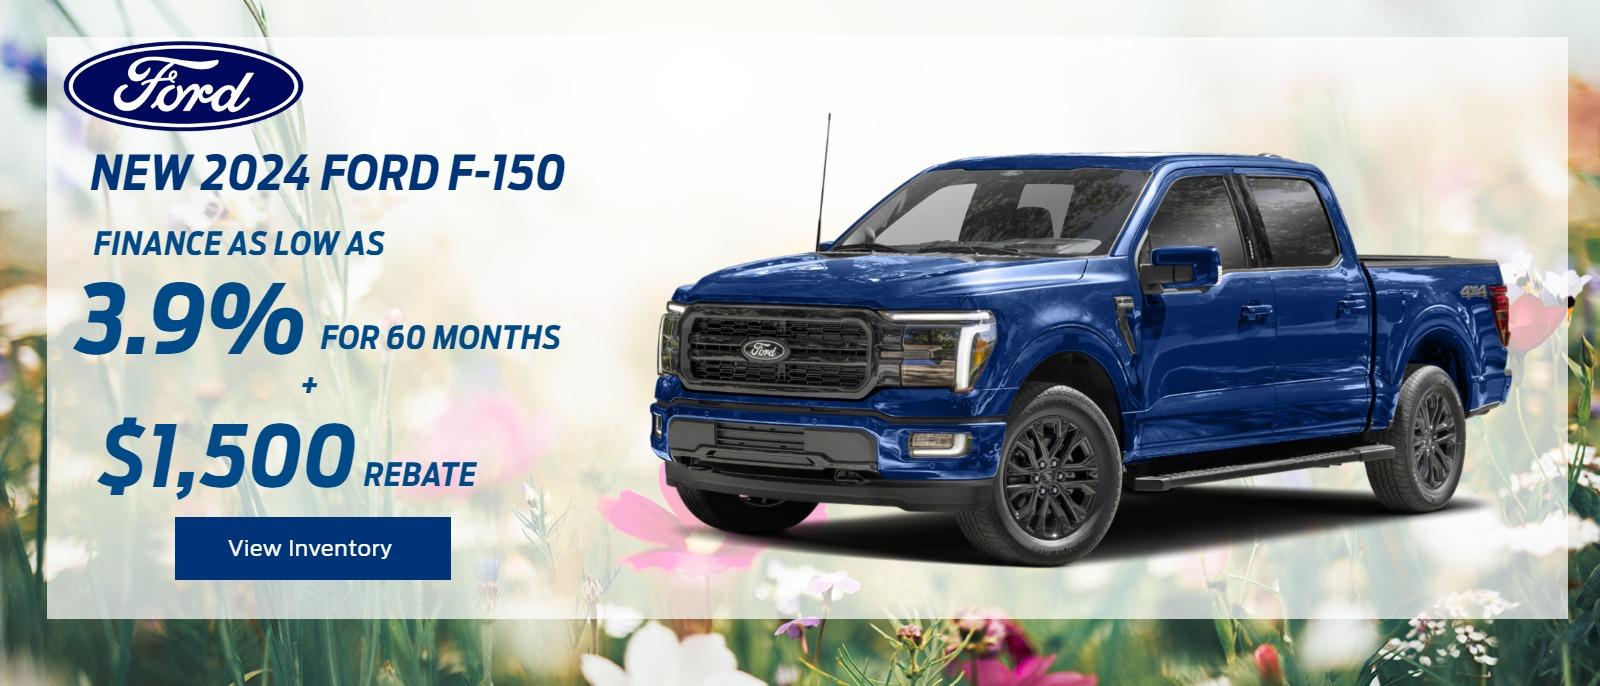 New 2024 Ford F-150 
 Finance as low as 3.9% FOR 60 MONTHS